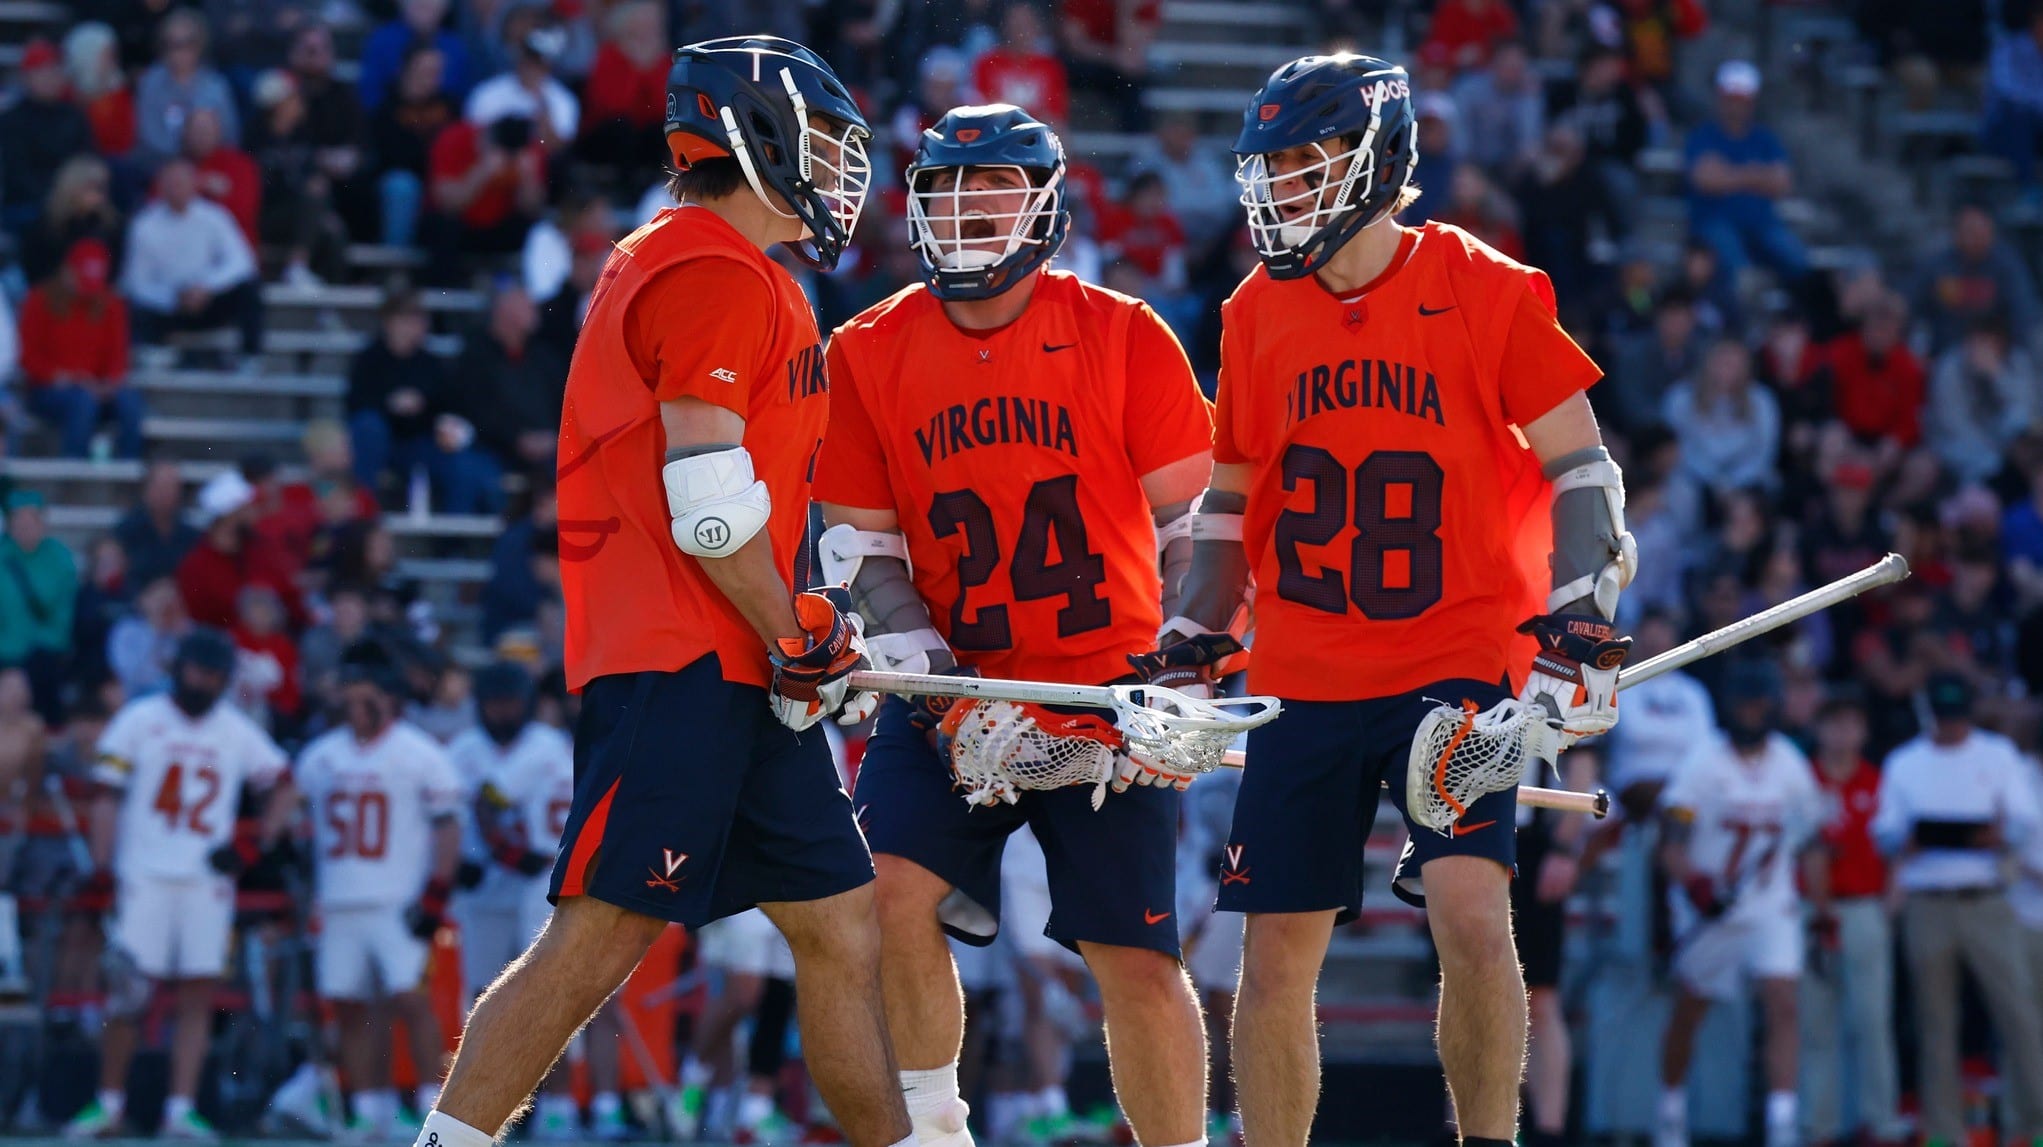 Connor Shellenberger celebrates after scoring a goal during the Virginia men's lacrosse game at Maryland.